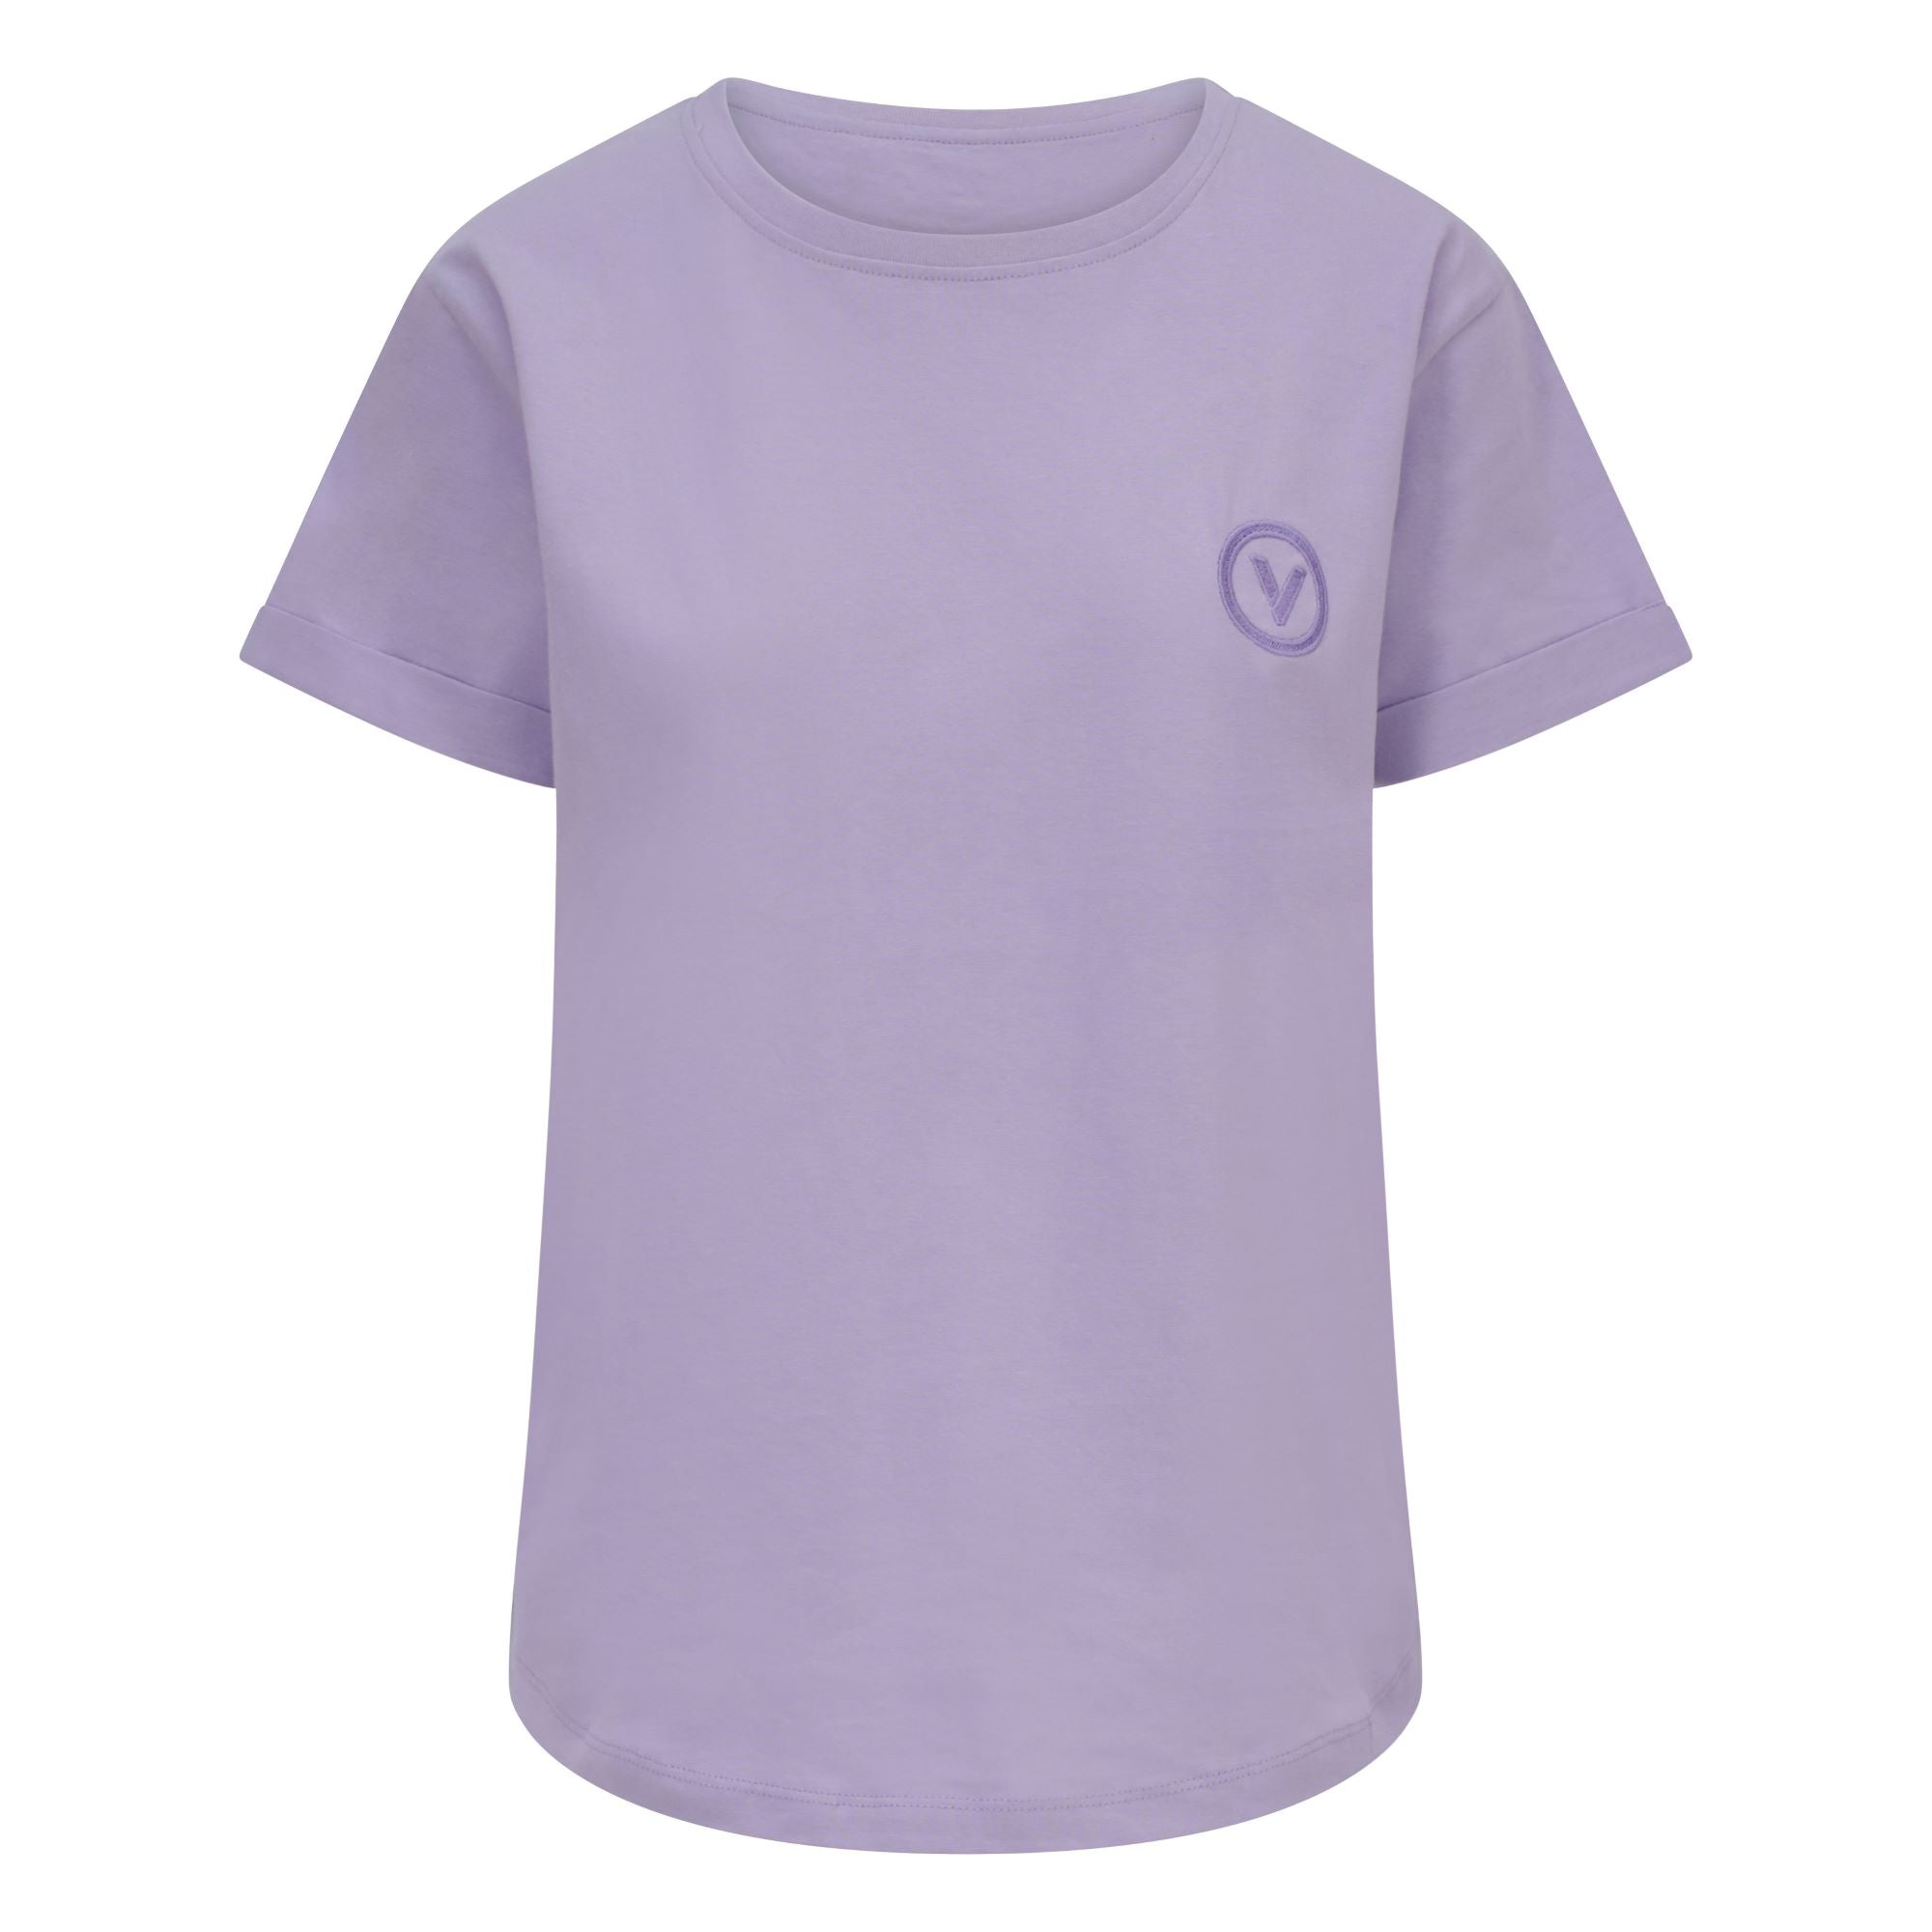 Validate Core Essentials Women's Rolled Sleeve T-Shirt Lilac